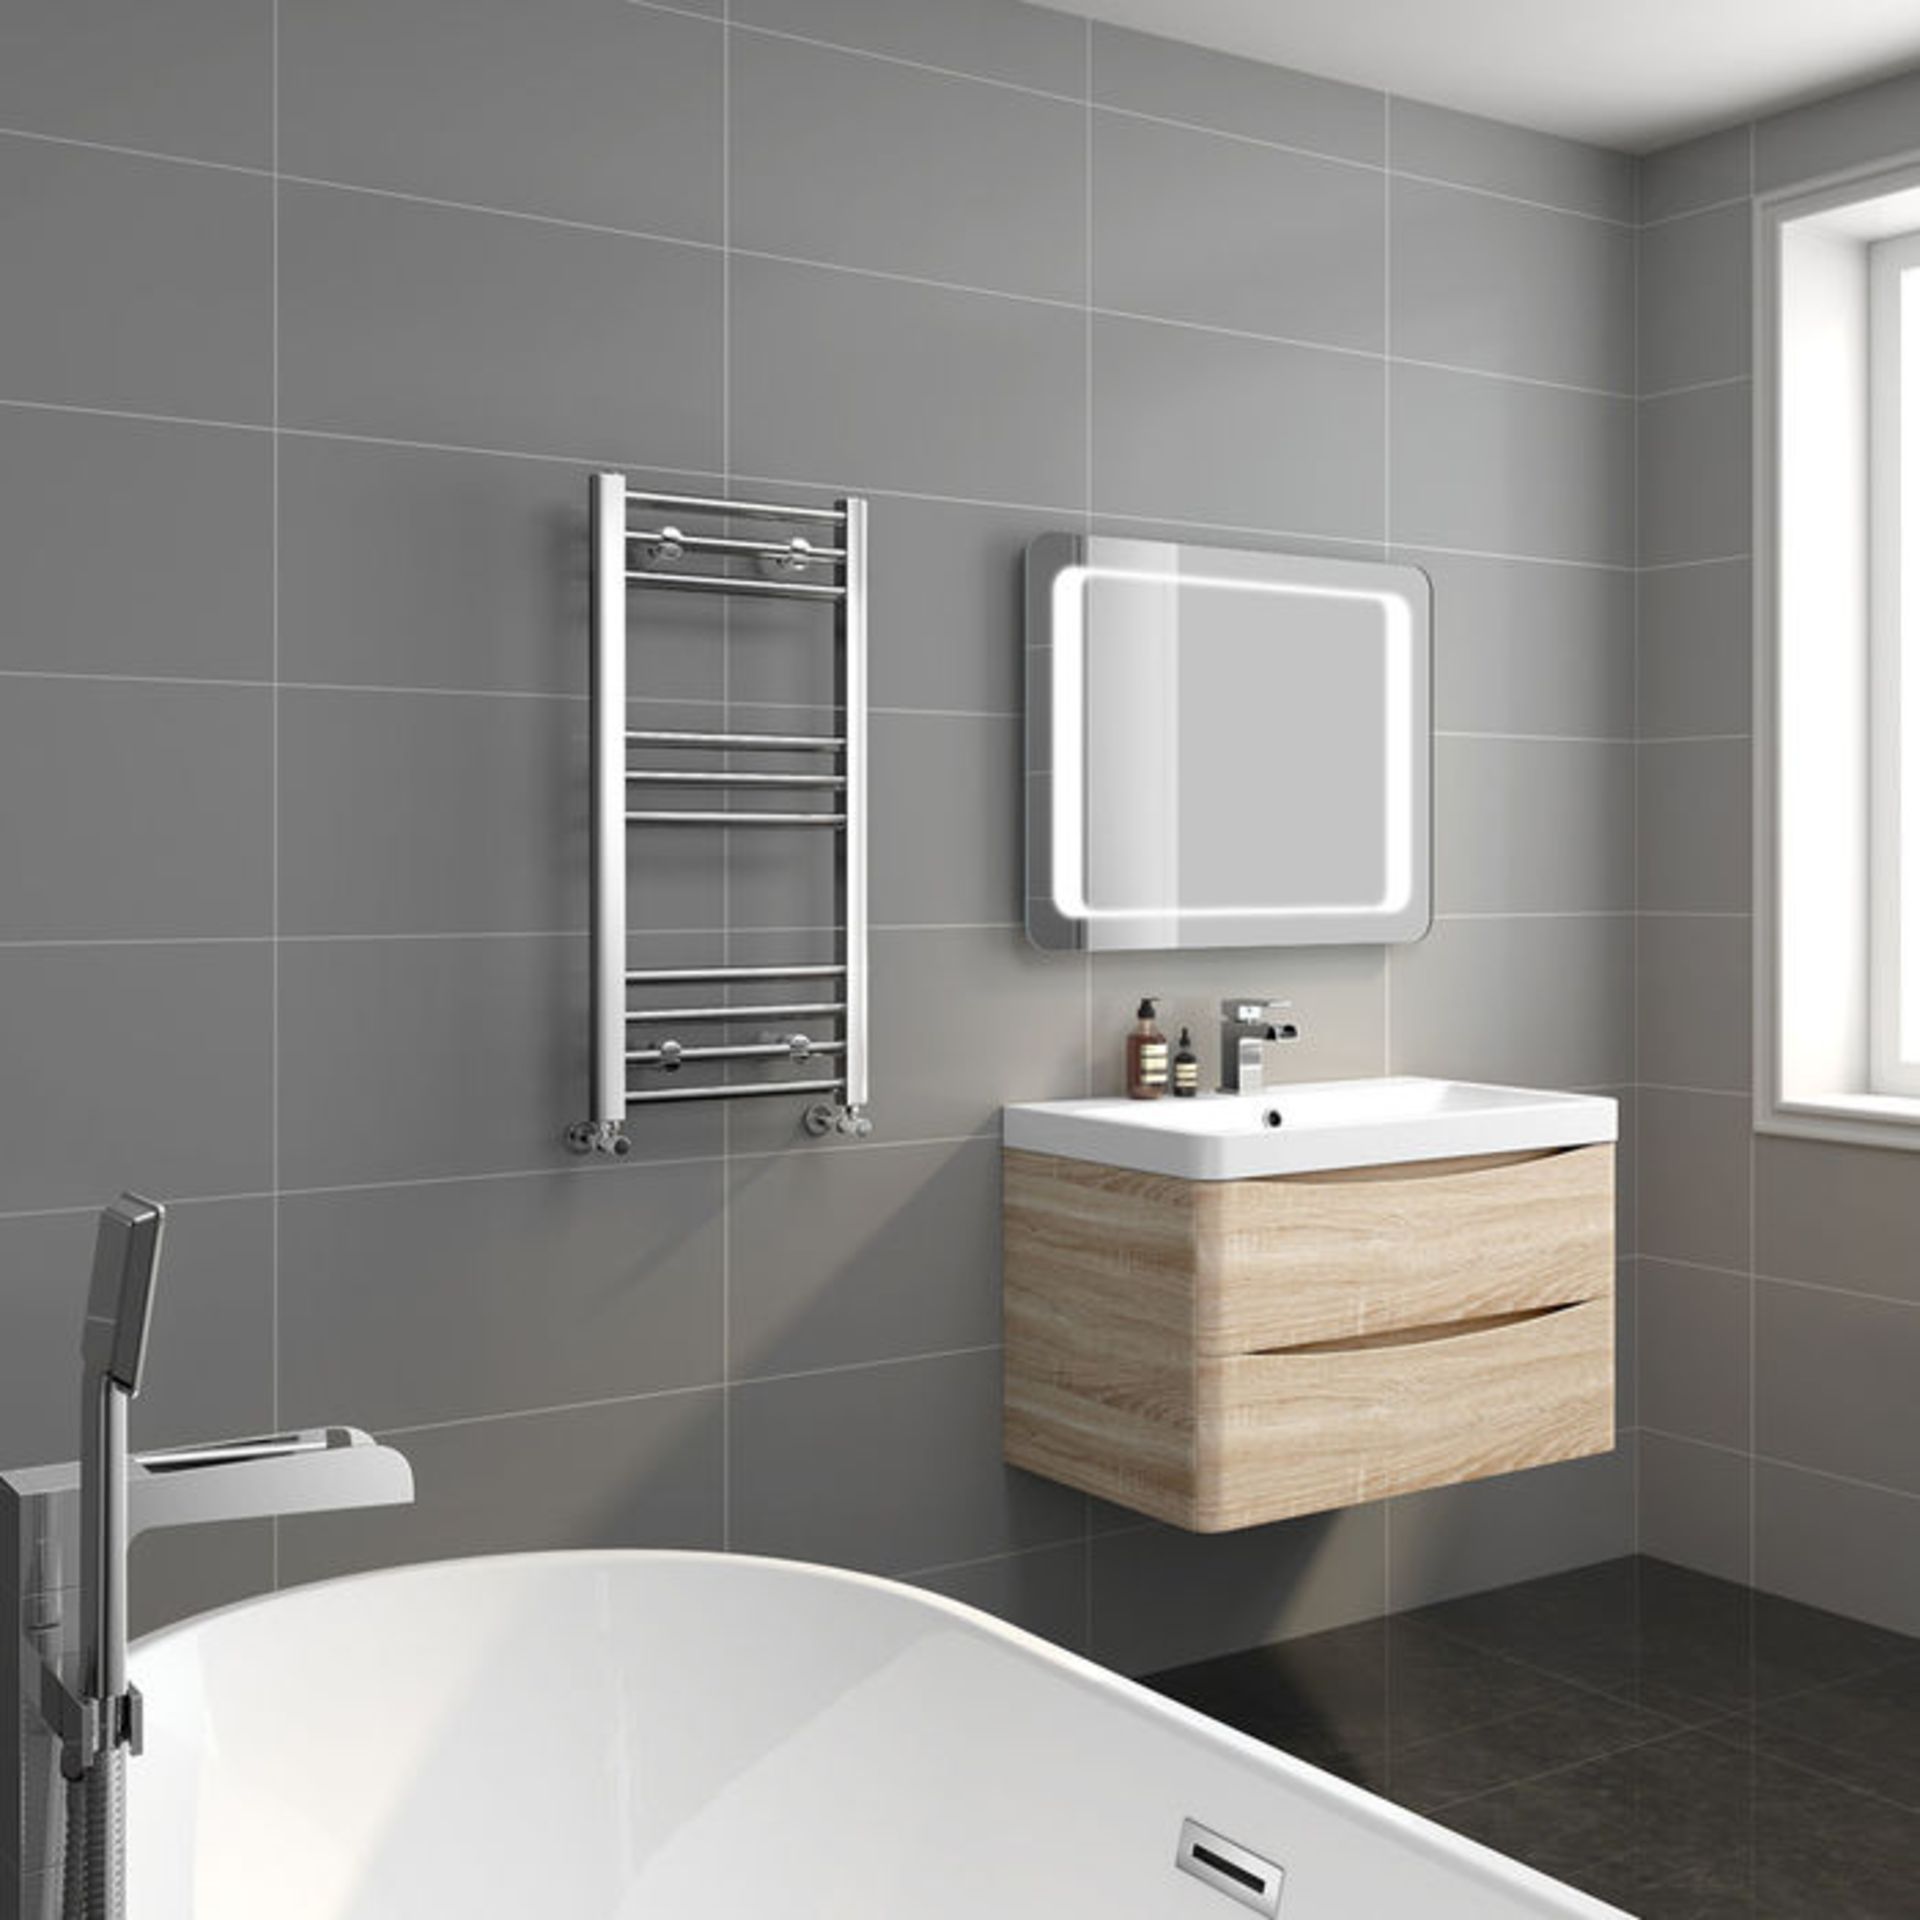 (RK46) 800x400mm - 20mm Tubes - Chrome Heated Straight Rail Ladder Towel Radiator. . Low carbon... - Image 2 of 3